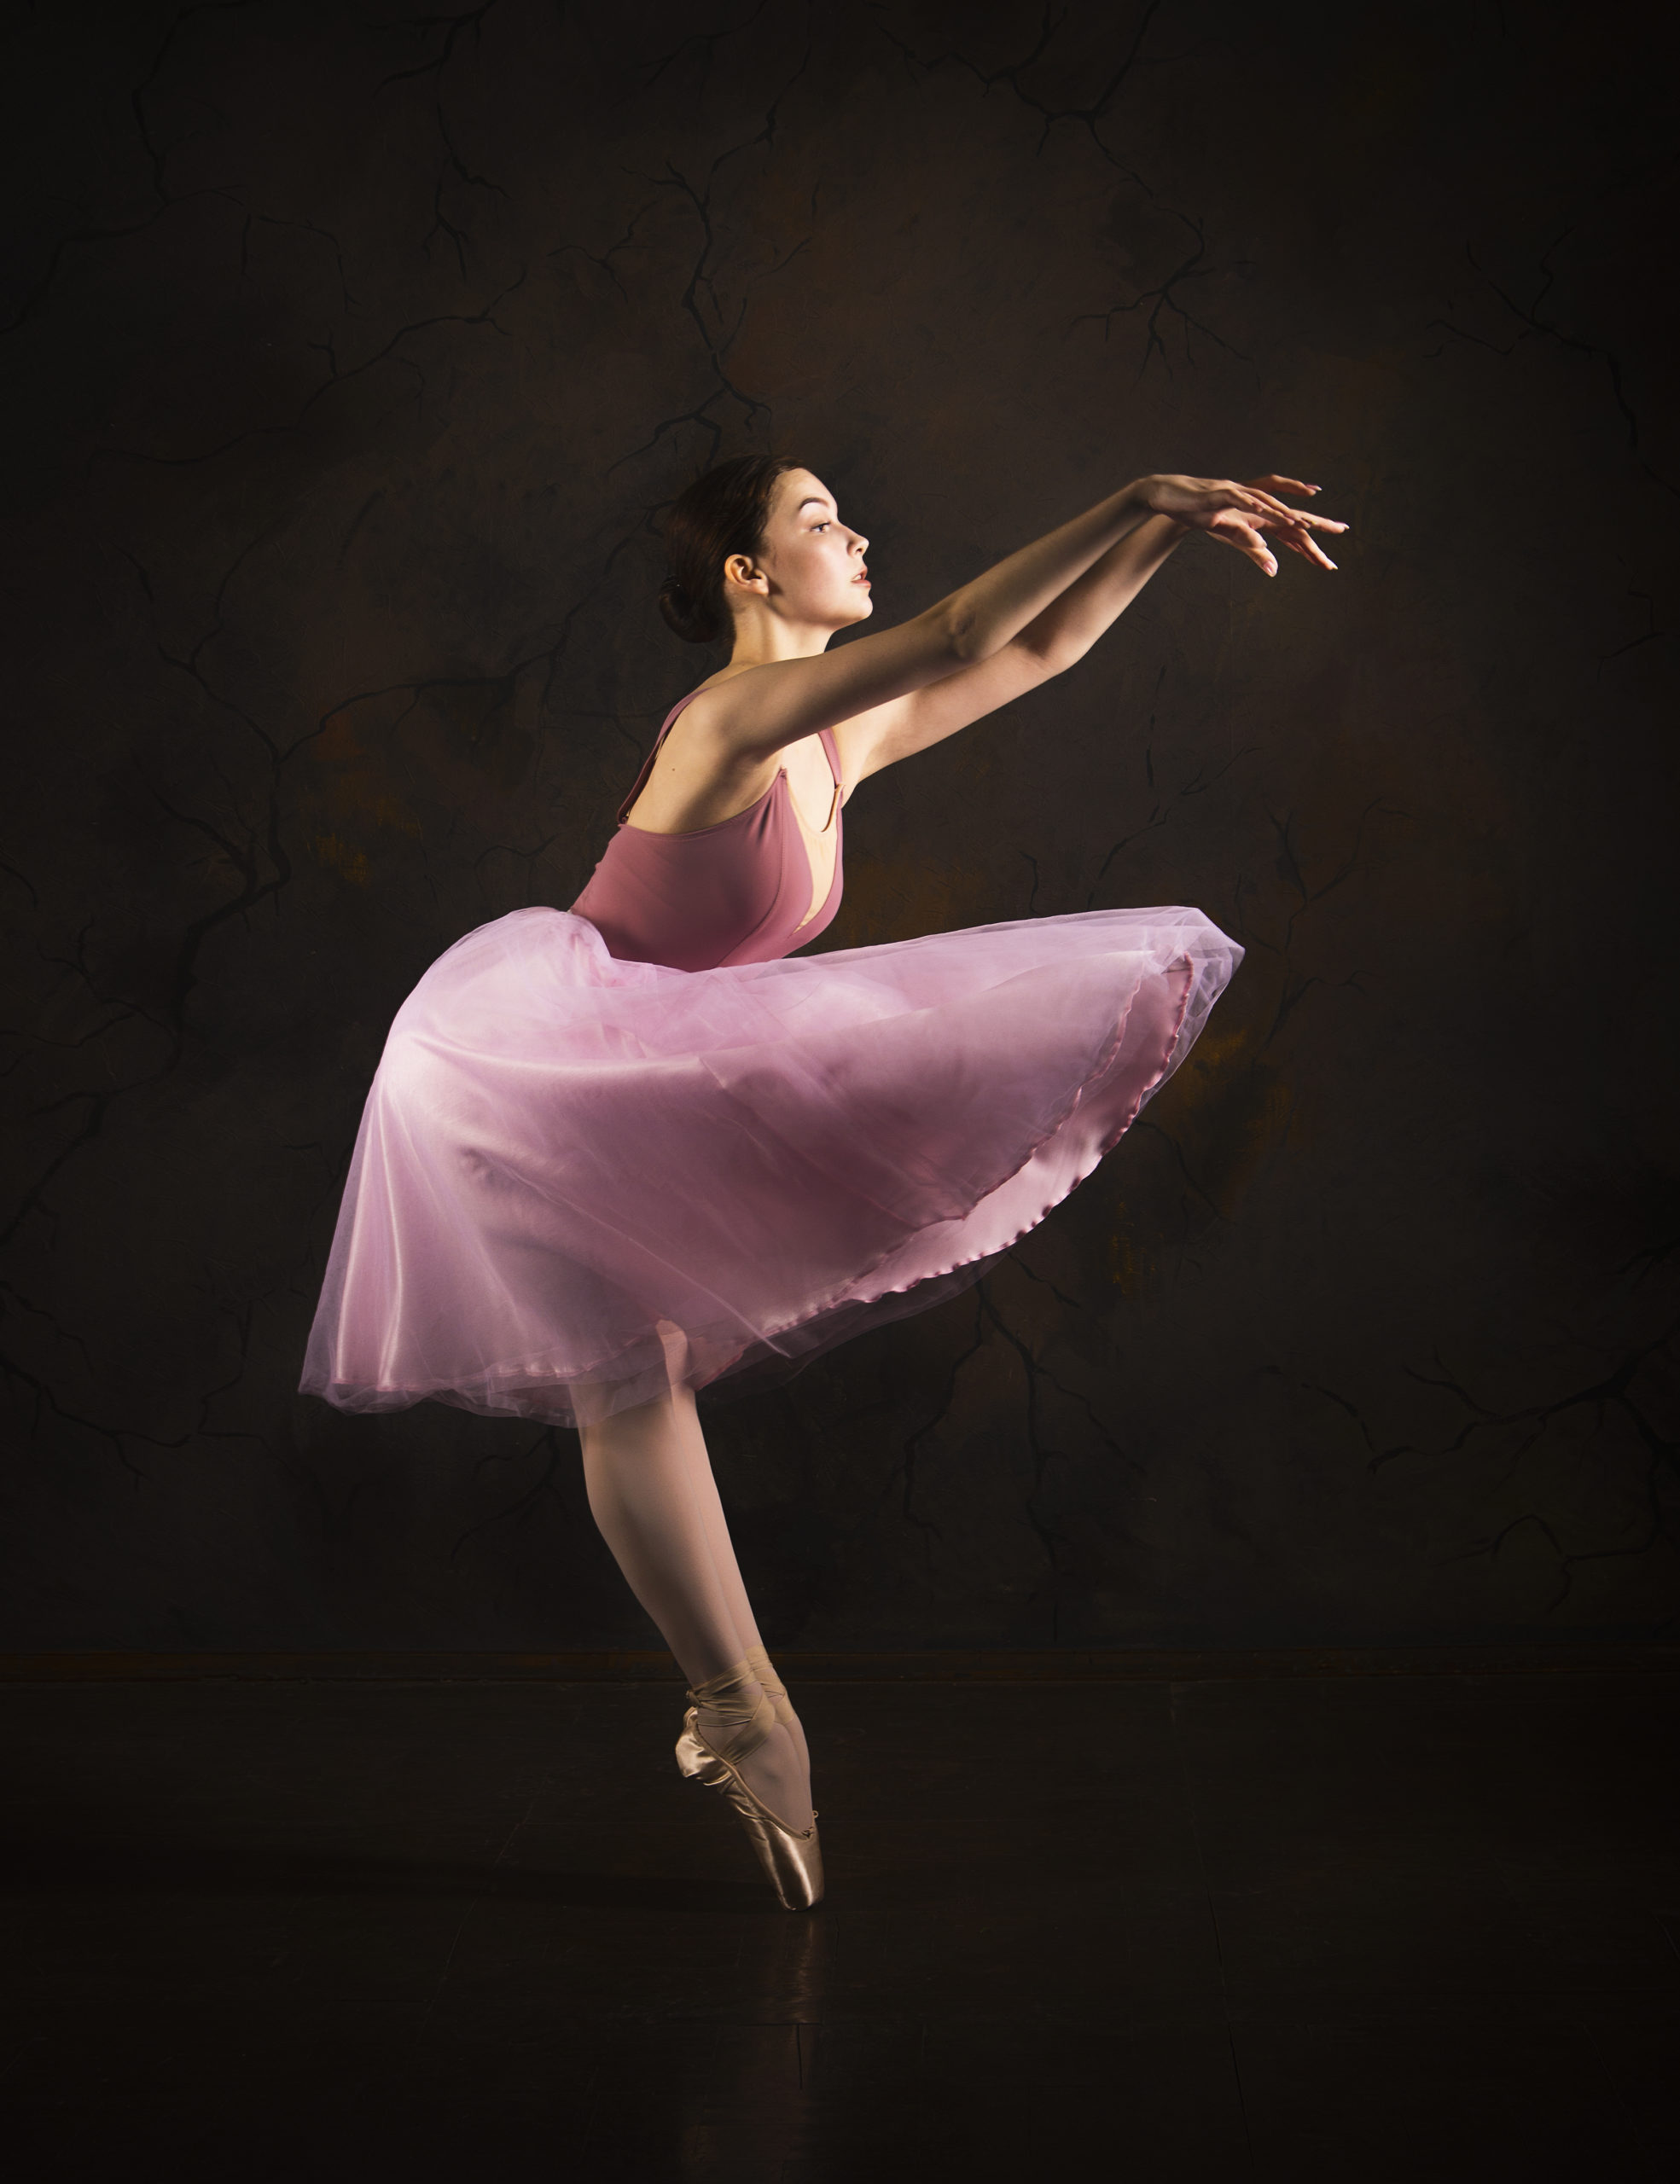 A slender girl in a pink skirt and beige top dancing ballet.